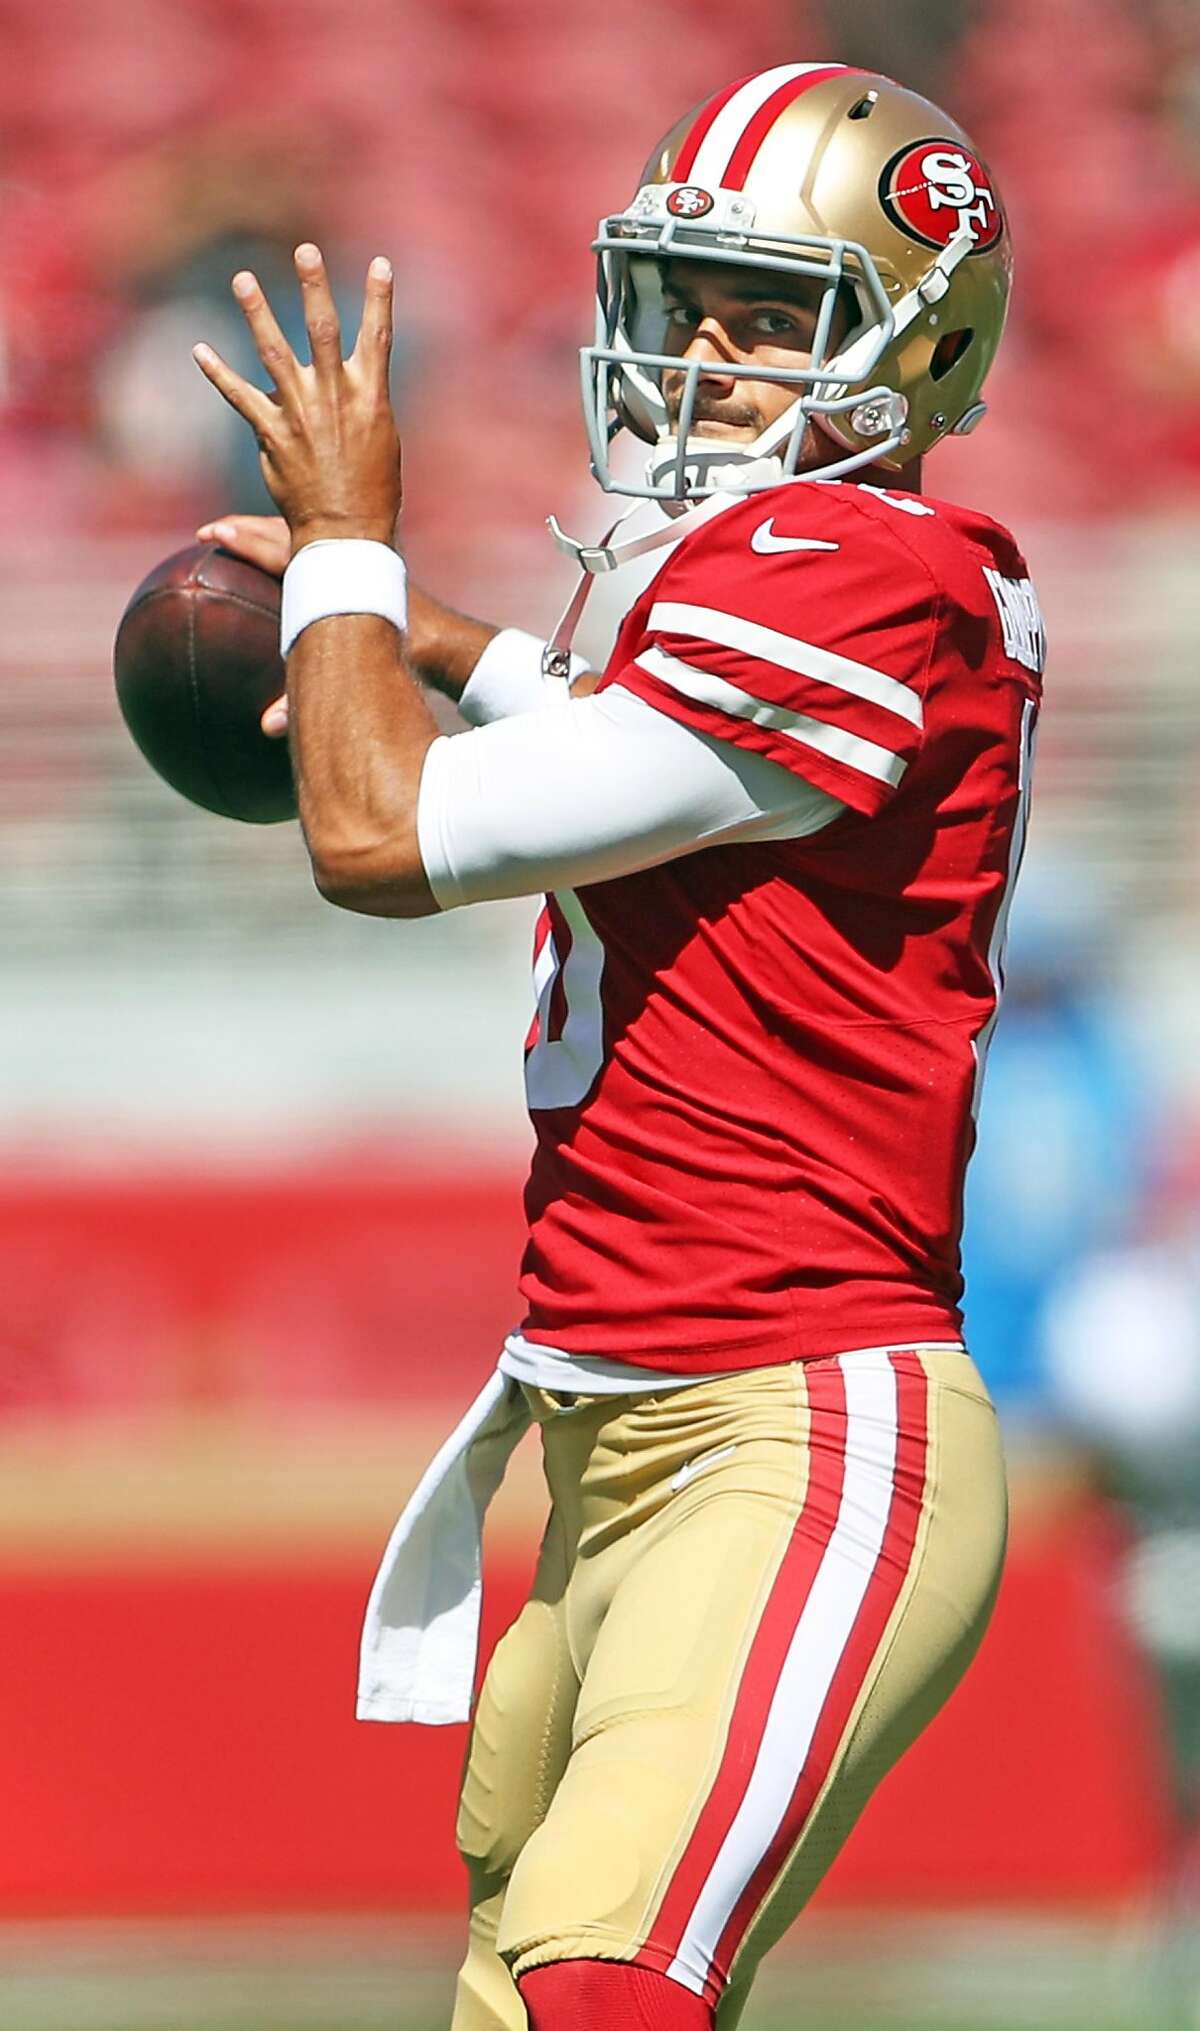 San Francisco 49ers' Jimmy Garoppolo warms up before playing Detroit Lions during NFL game at Levi's Stadium in Santa Clara, Calif. on Sunday, September 16, 2018.